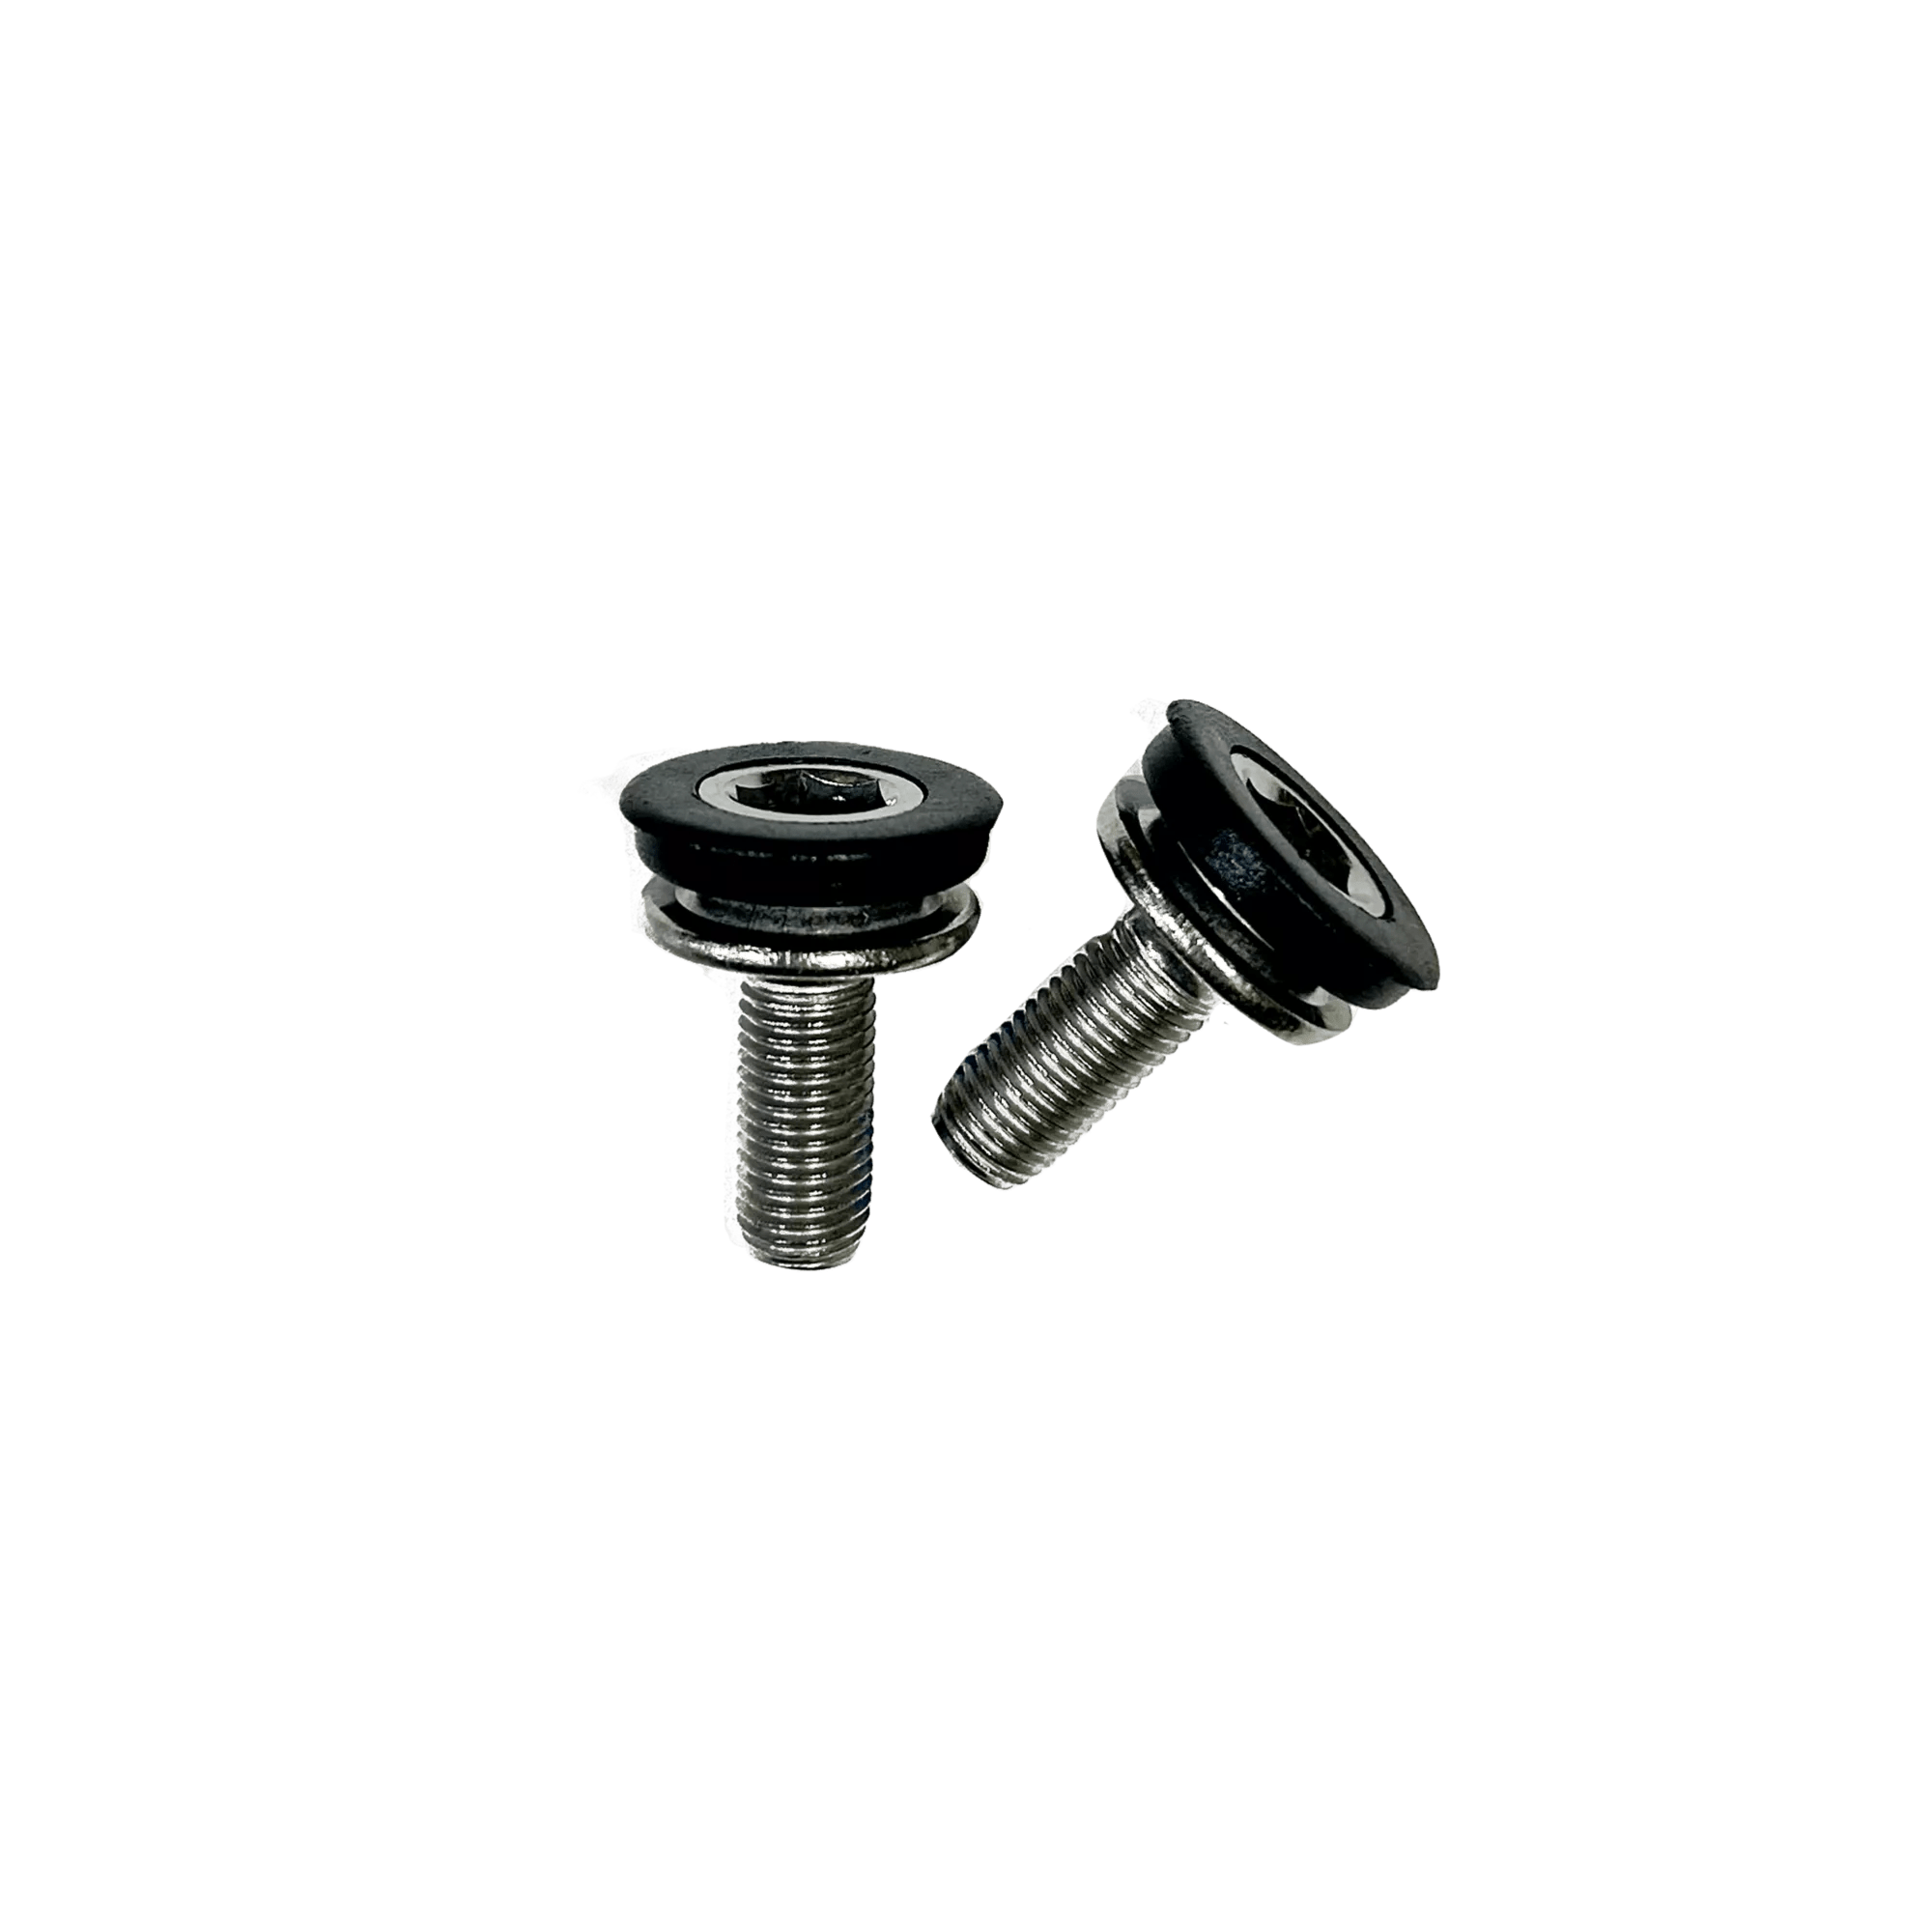 WILDERNESS SYSTEMS - Pedal Drive Crank Arm Bolts - 2 Pack -  - 9800932 - 